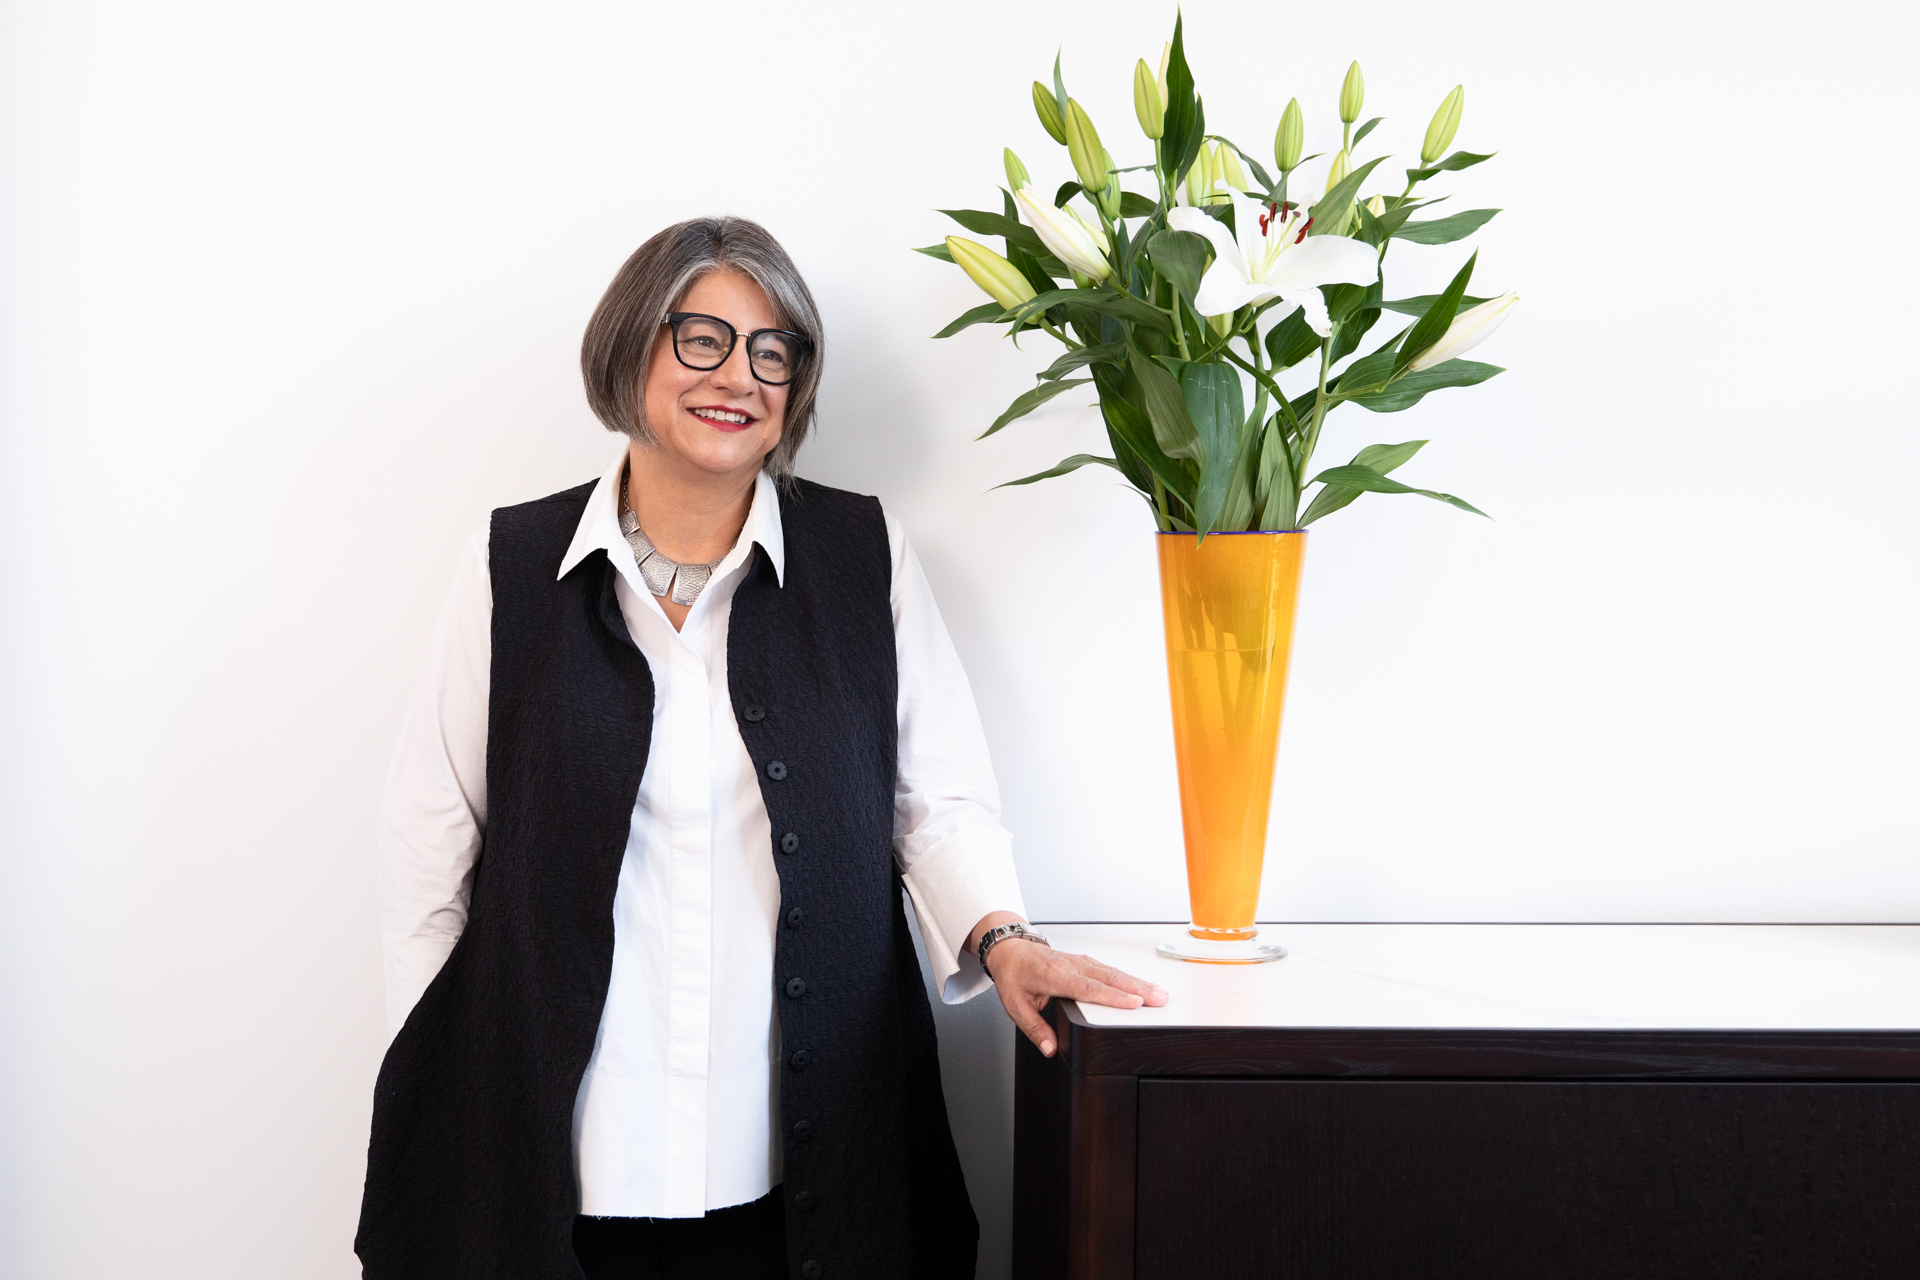 Portrait of a female business owner standing next to a vase of lillies